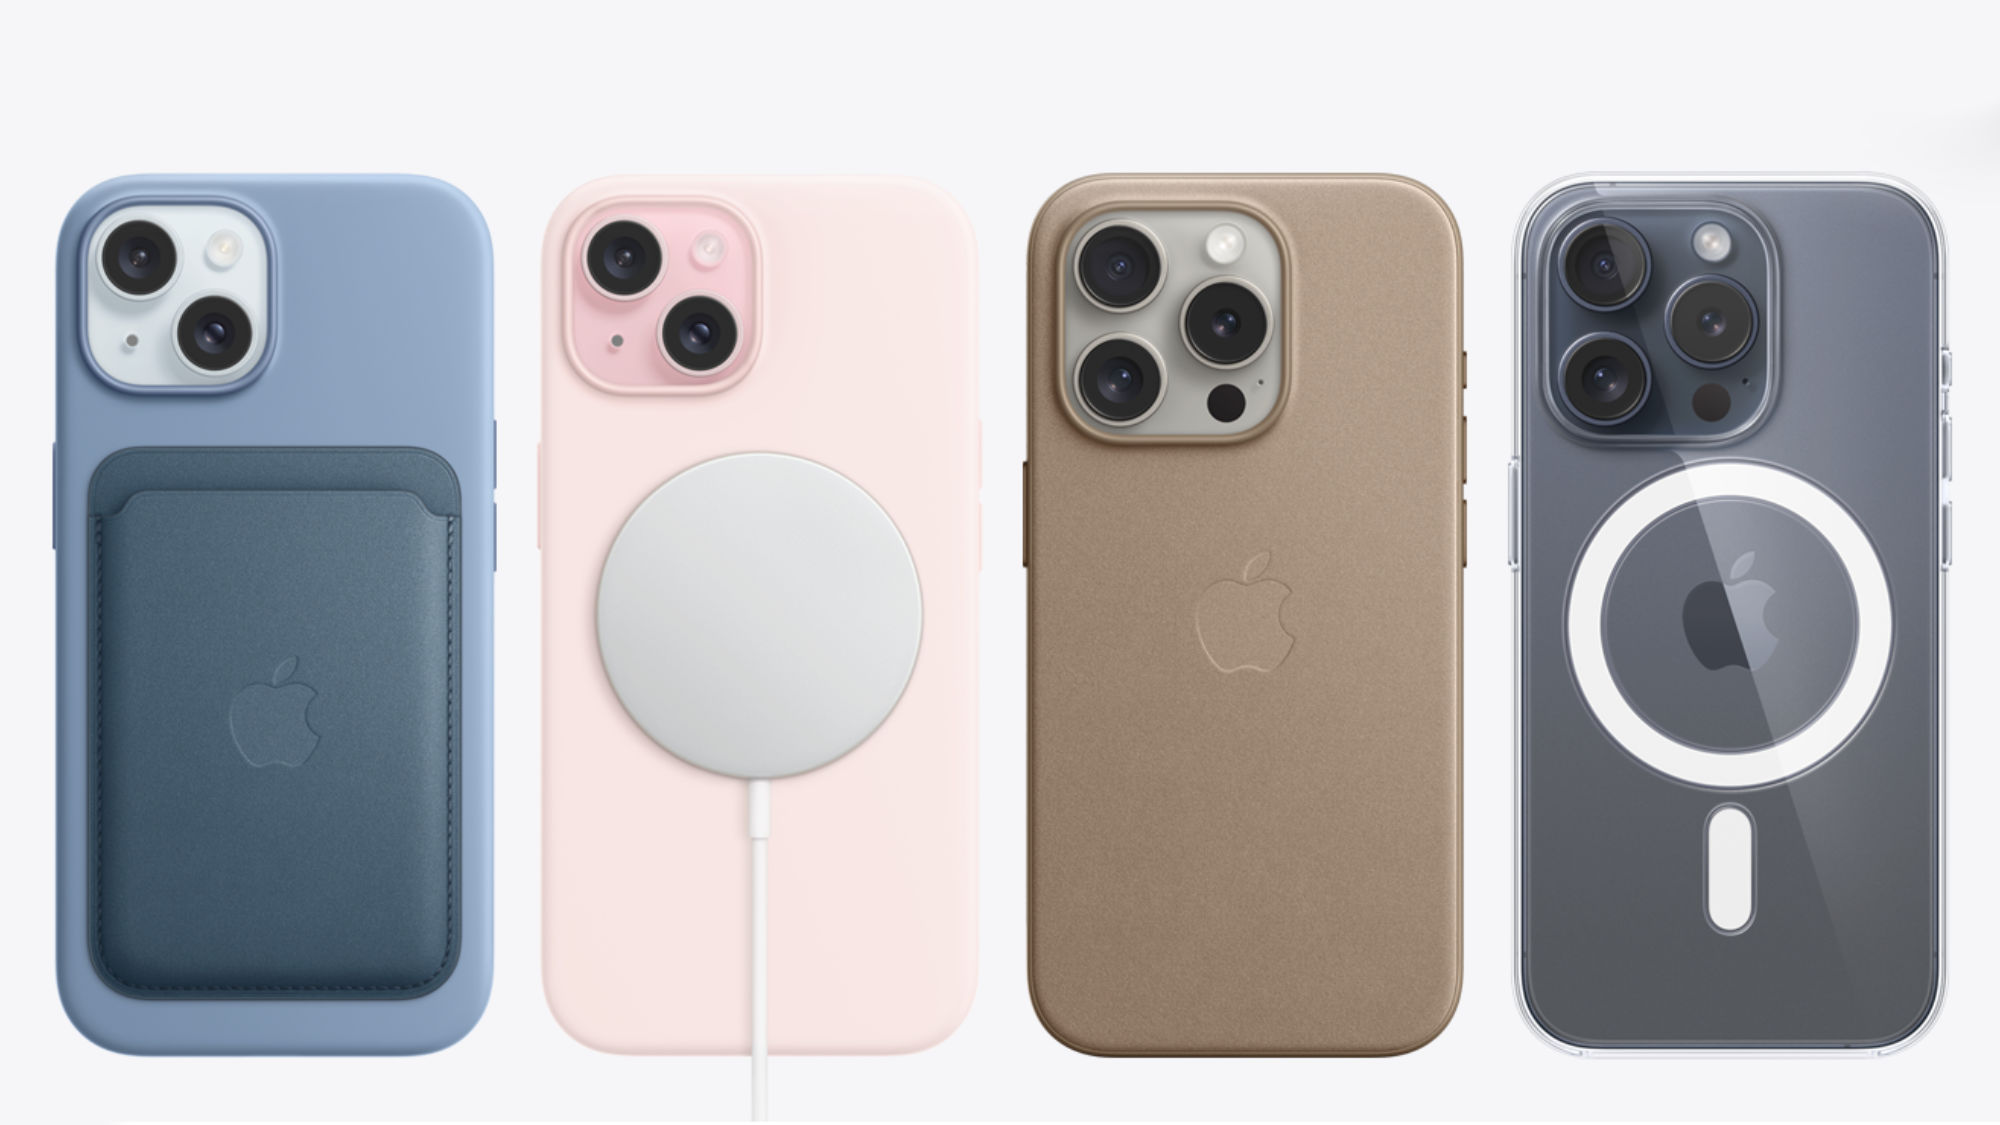 Apple's spring colors leaked: Raspberry, Soft Mint, Sunshine, and more